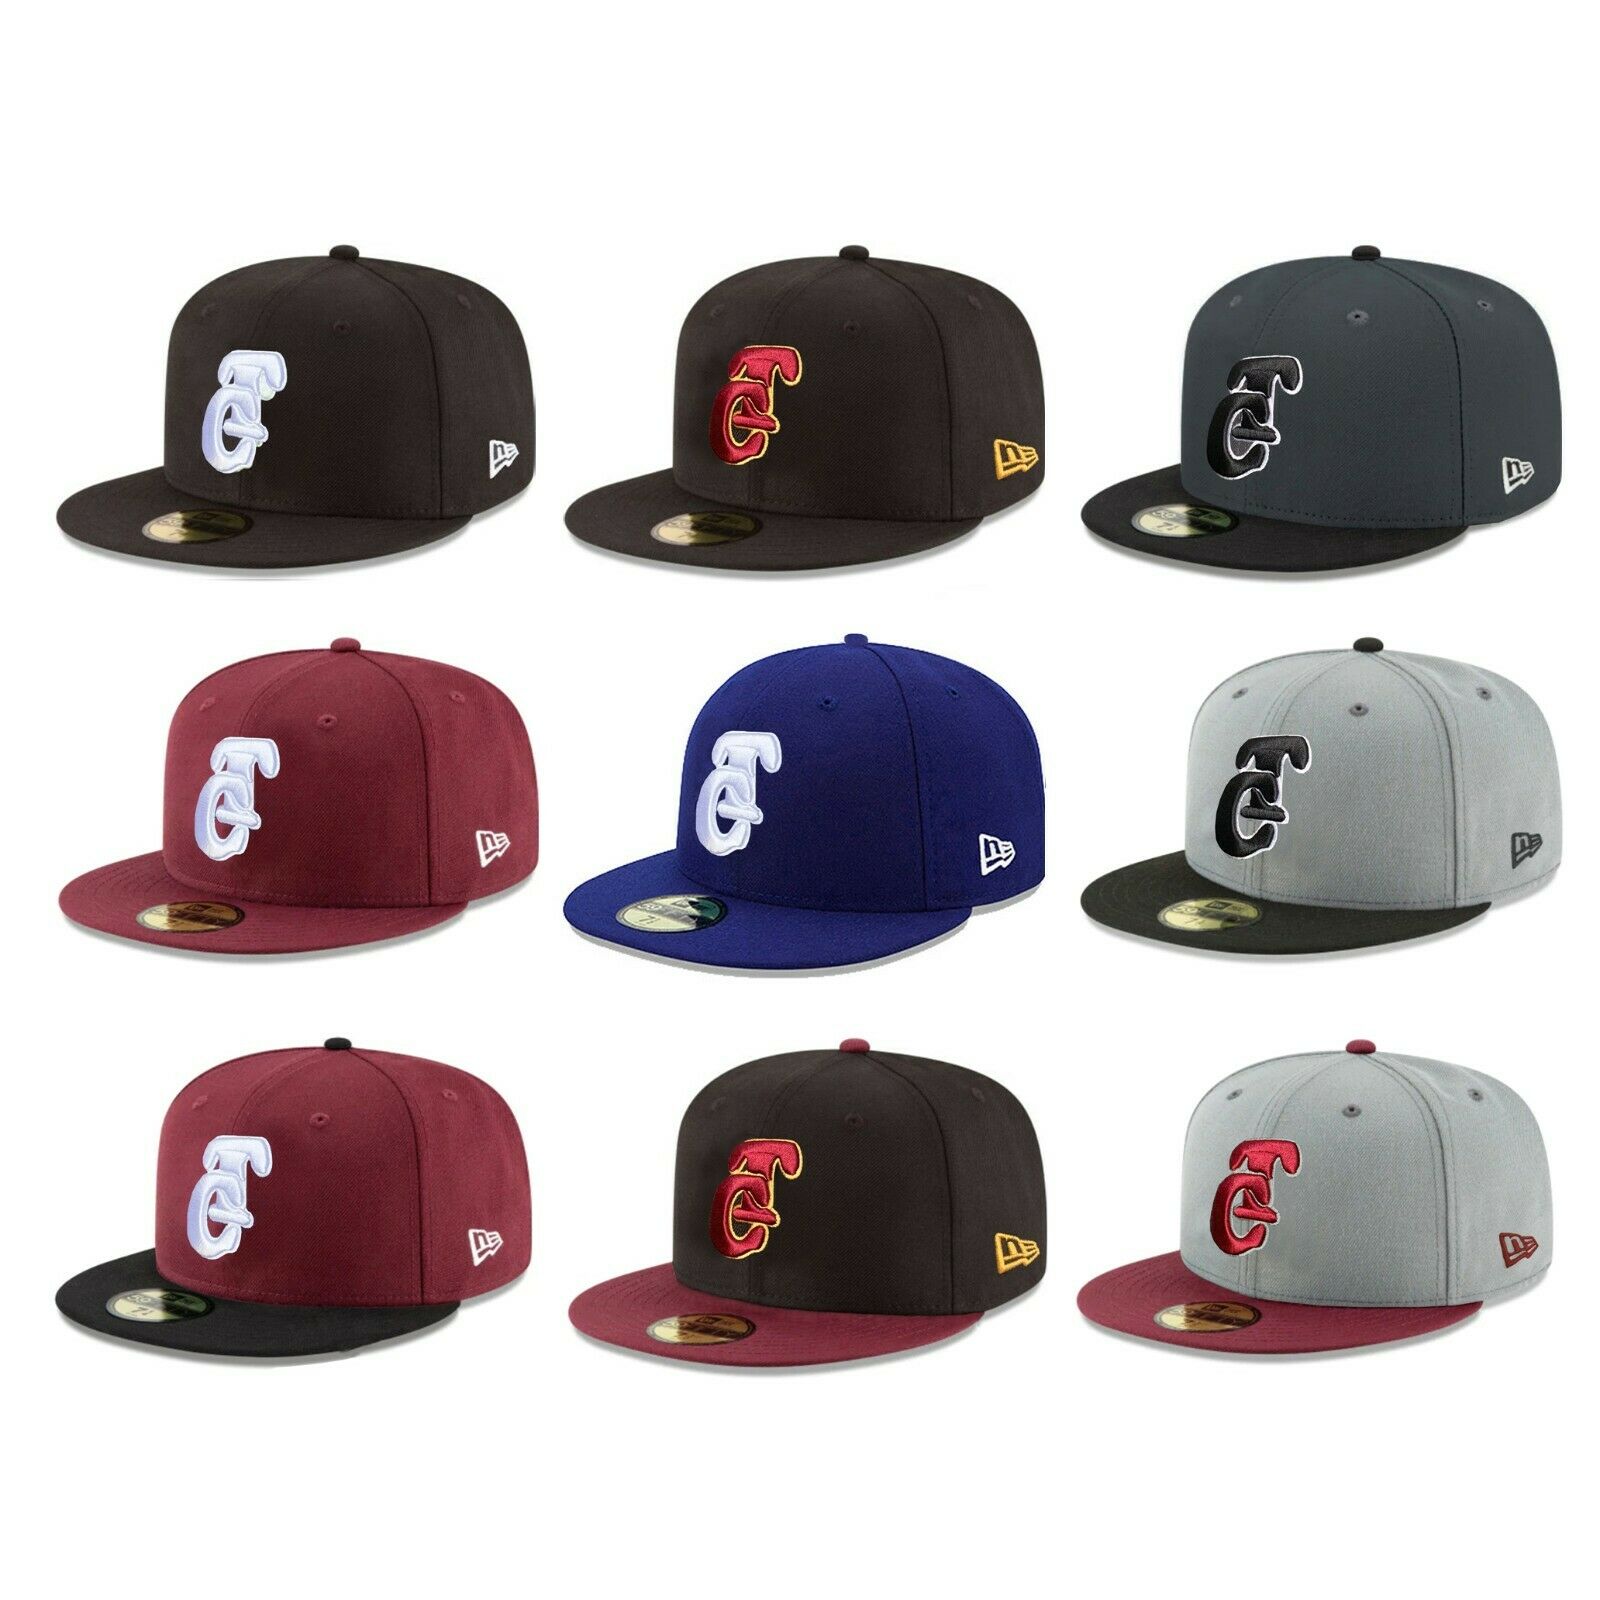 Tomateros De Culiacán Tg Pacific League - Authentic New Era 59fifty Fitted Cap